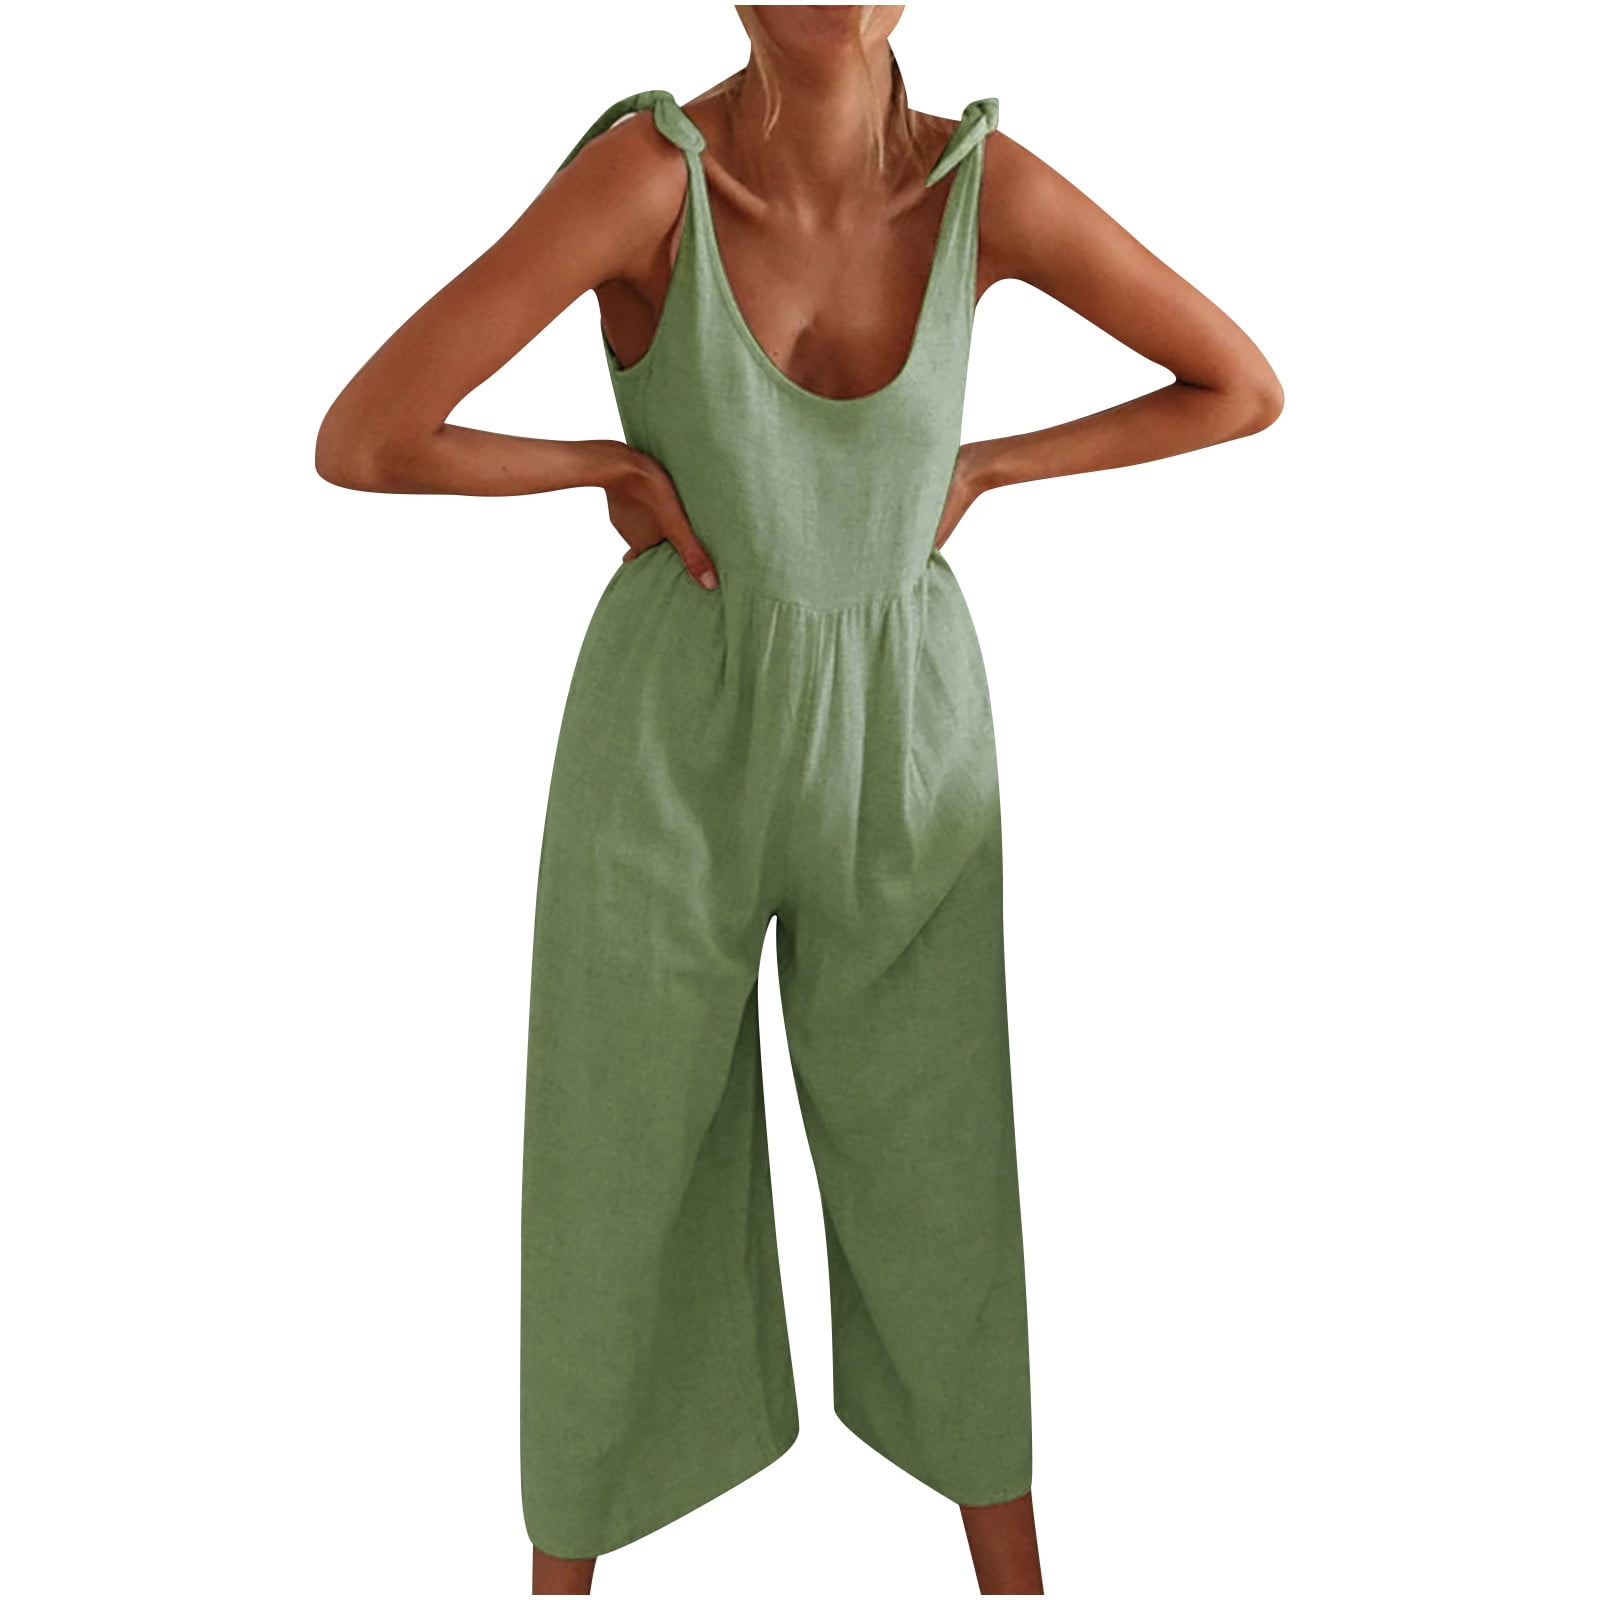 Linen Jumpsuits for Women Casual,SMALLE◕‿◕ Womens Sleeveless Loose Jumpsuits Romper with Pockets Casual Long Pants 